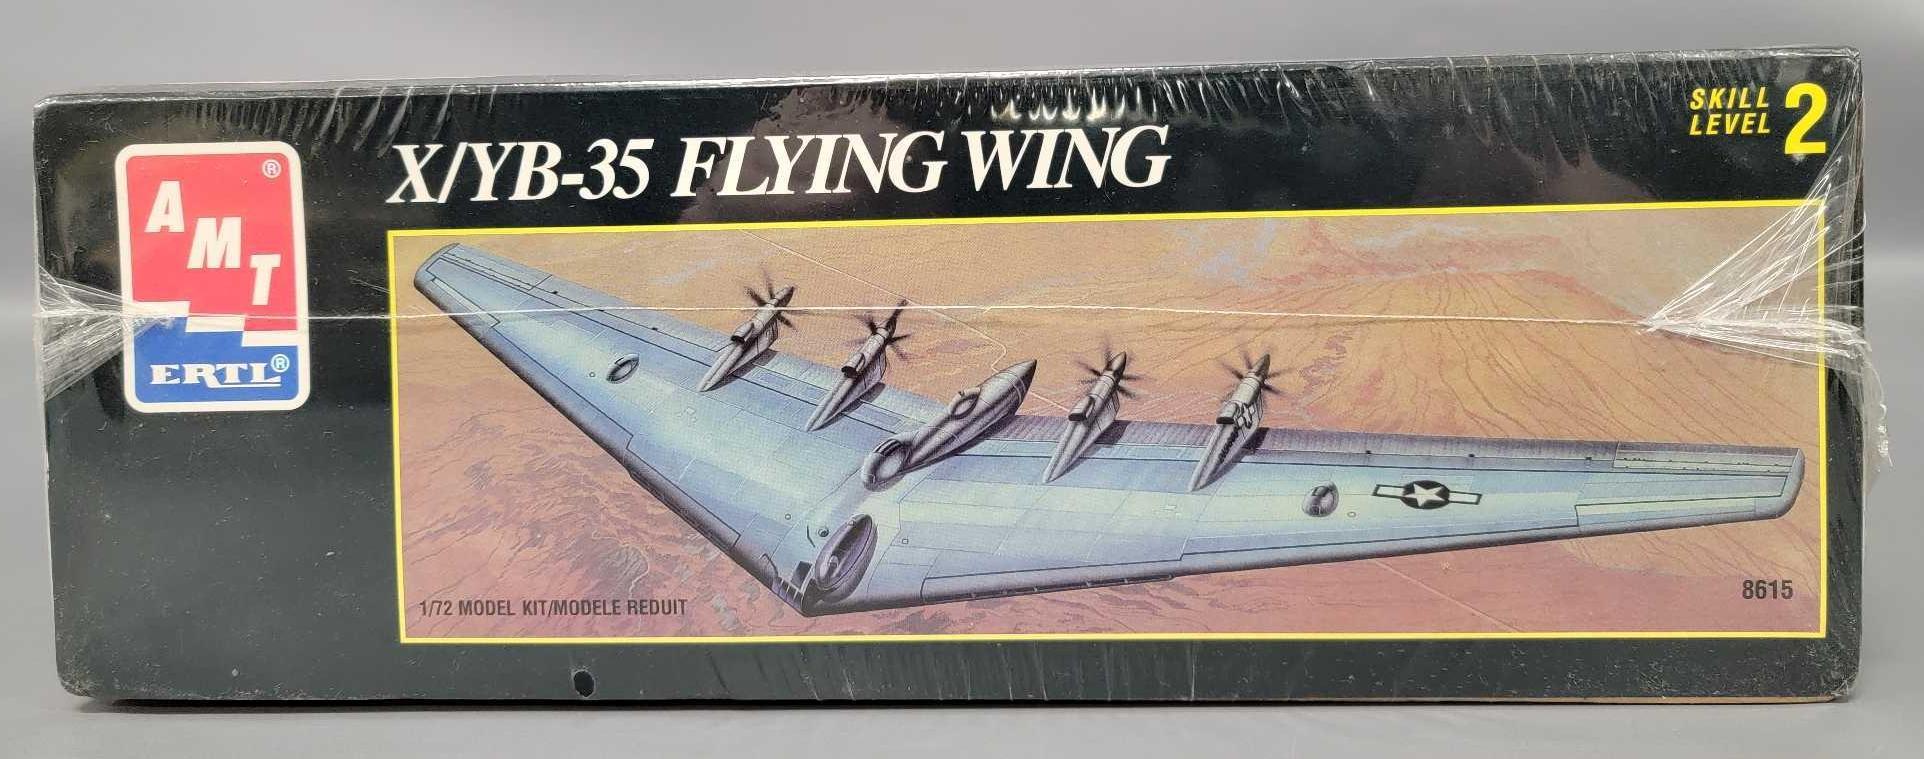 AMT ERTL 1/72 scale X/YB-35 Flying Wing model kit factory sealed